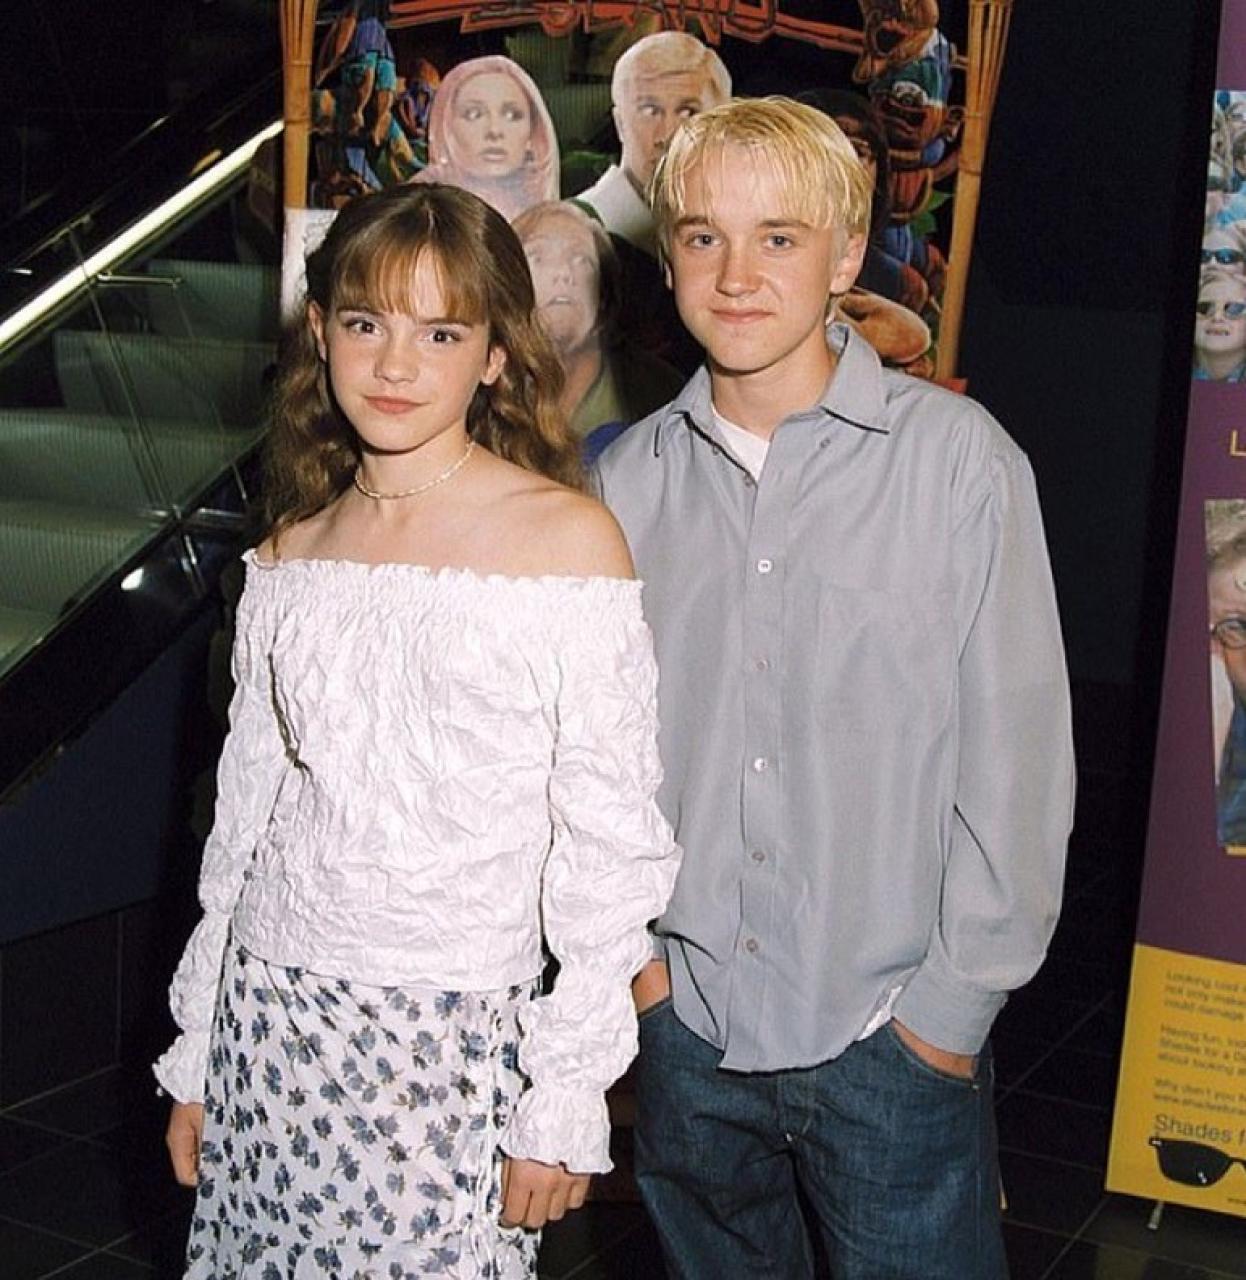 5 Reasons Why Emma Watson And Tom Felton Are 'Soul Mates': The Harry Potter  Co-Stars Are Causing A Fan Frenzy With Declarations Of Love In New Memoir  Beyond The Wand And On